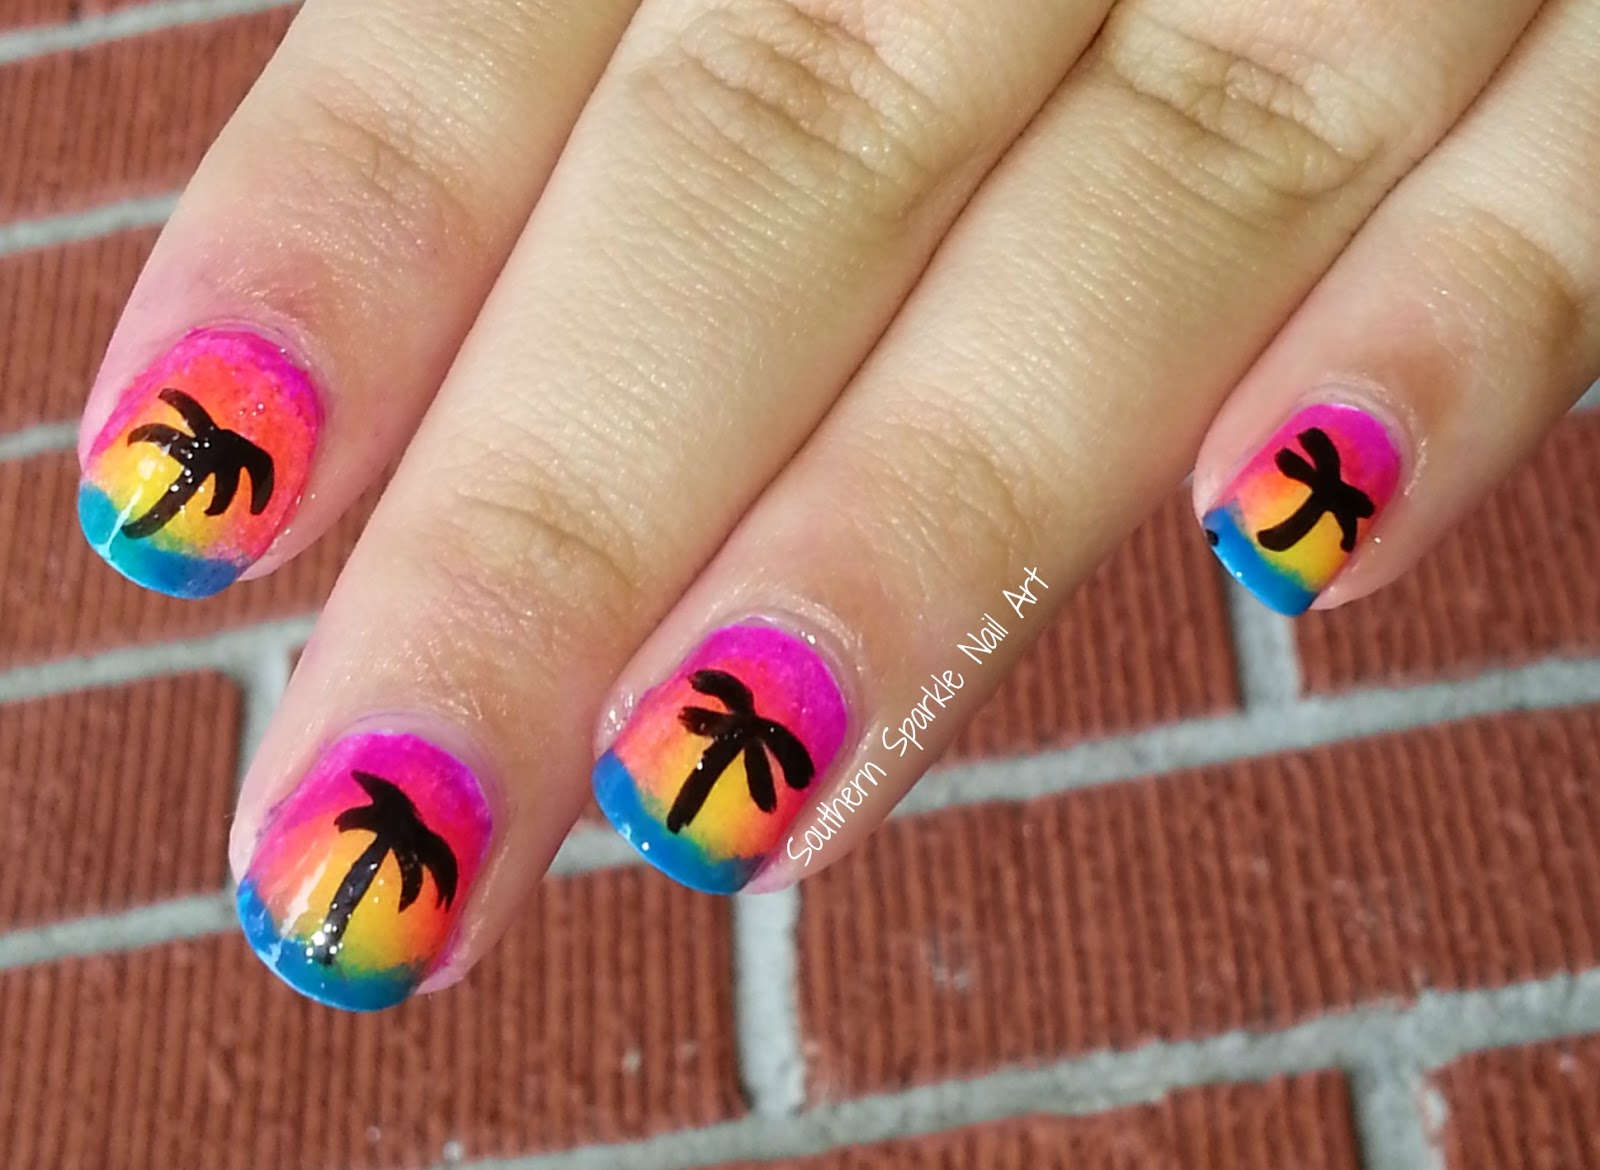 2. Tropical Sunset Nail Art - wide 6